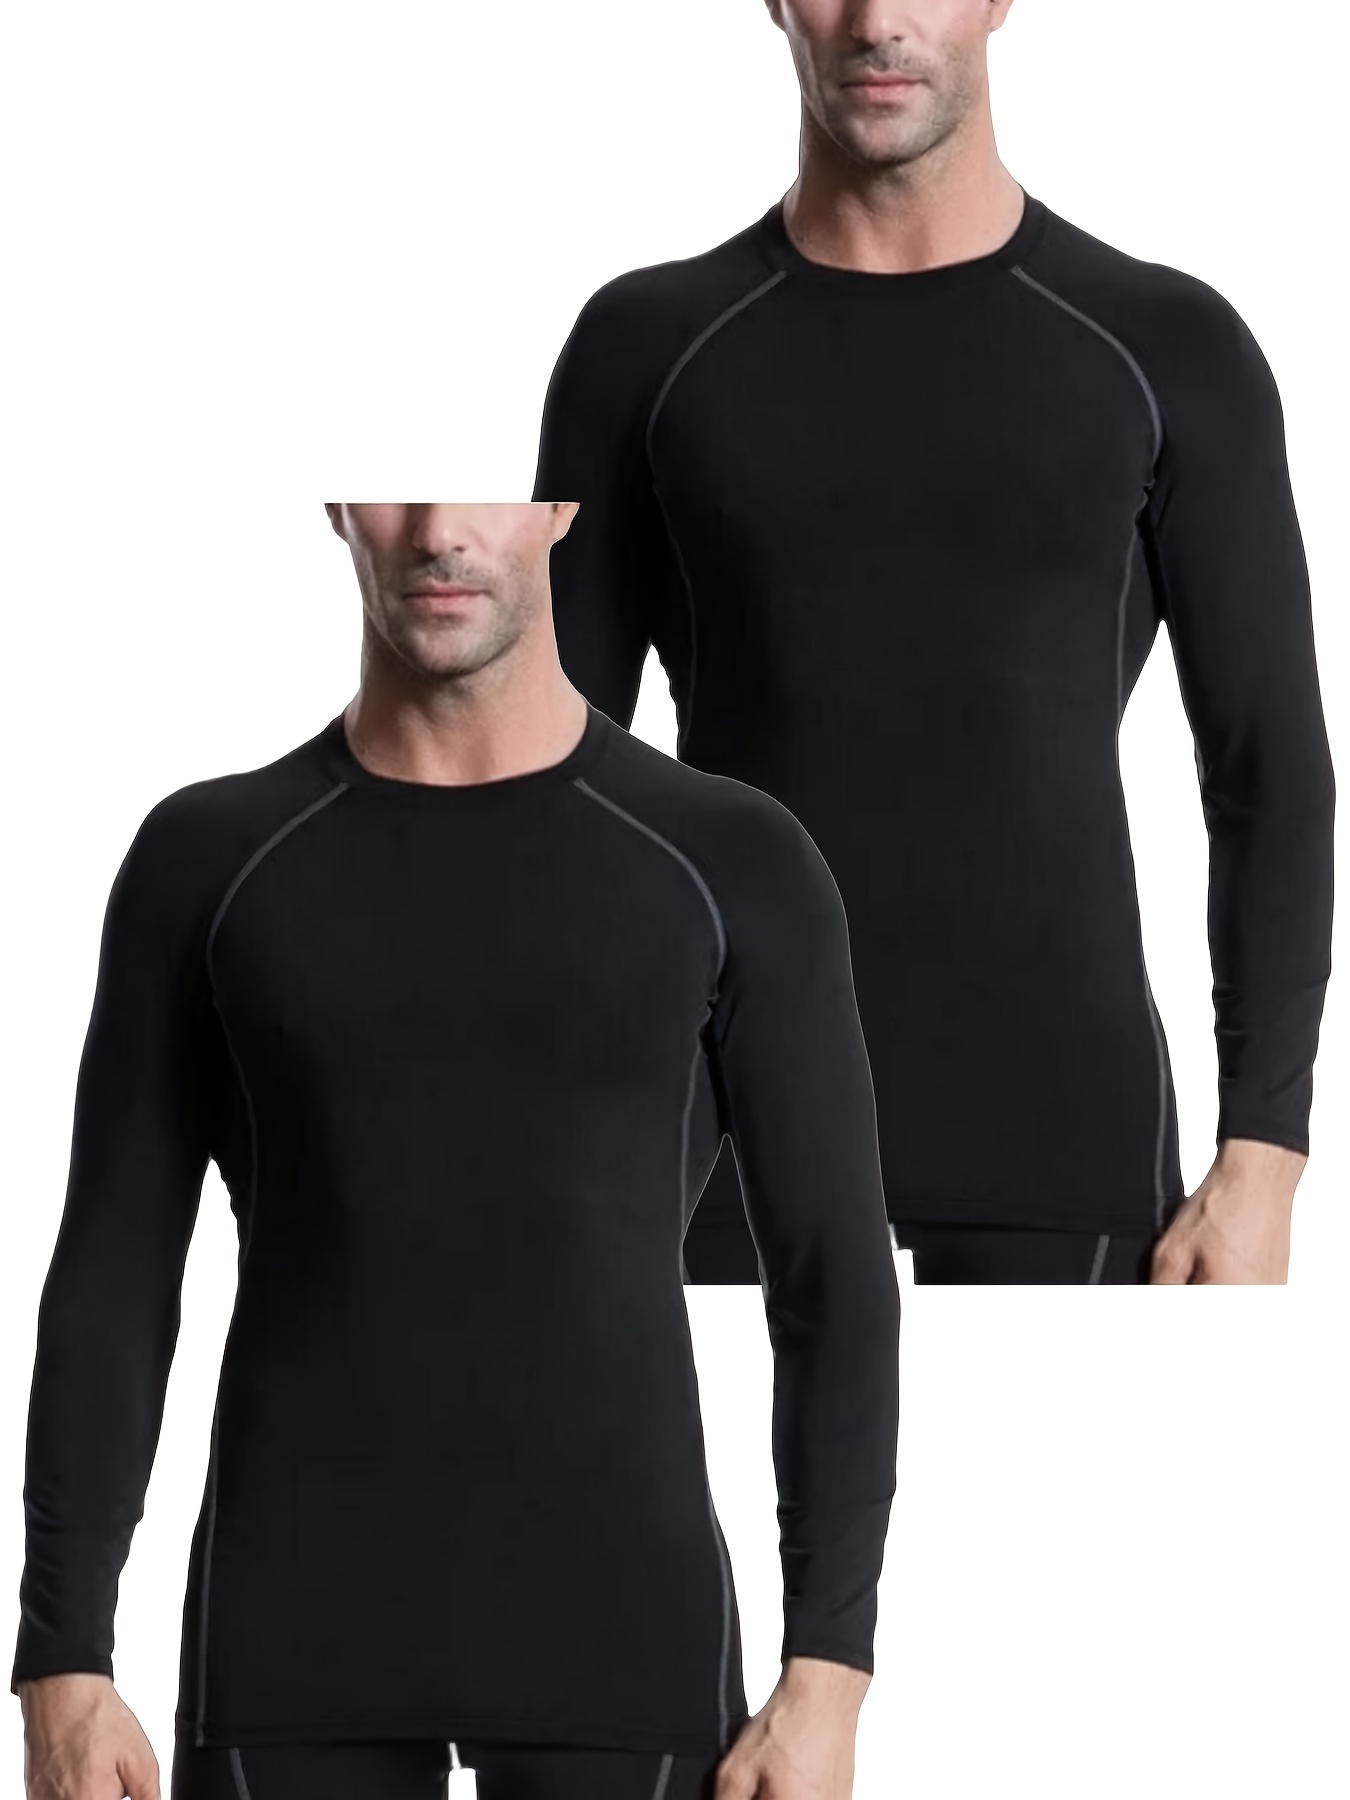 Dropship Men's Athletic Long Sleeve Compression Shirts Cool Dry Sport  Workout Underwear Shirt,Athletic Base Layer Top to Sell Online at a Lower  Price